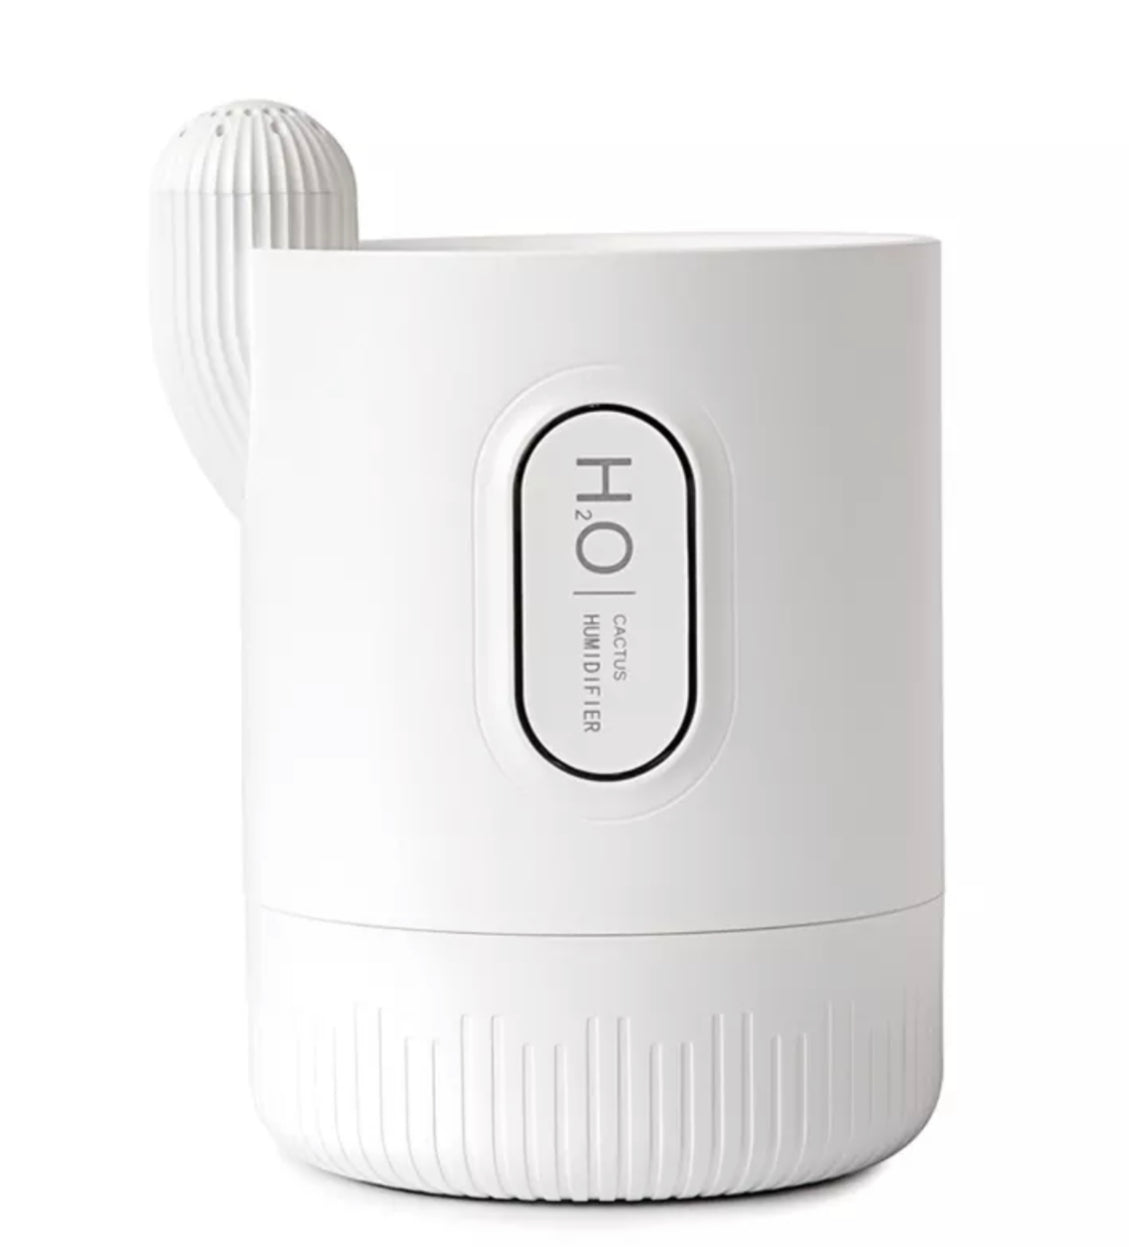 Wireless Cactus Air Humidifier H2O Portable Ultrasonic Aroma Diffuser Brand new and high quality -Quiet And Continuously Operation Won't Interfere with Your Work, Sleep & Drive. -Diffuse Mist Throughout Your Living Space & Enhance the Moisture of the Skin Space. -Fashion design,ECO-Friendly and whisper quiet -Quick humidification and purify air,Reduce static electricity